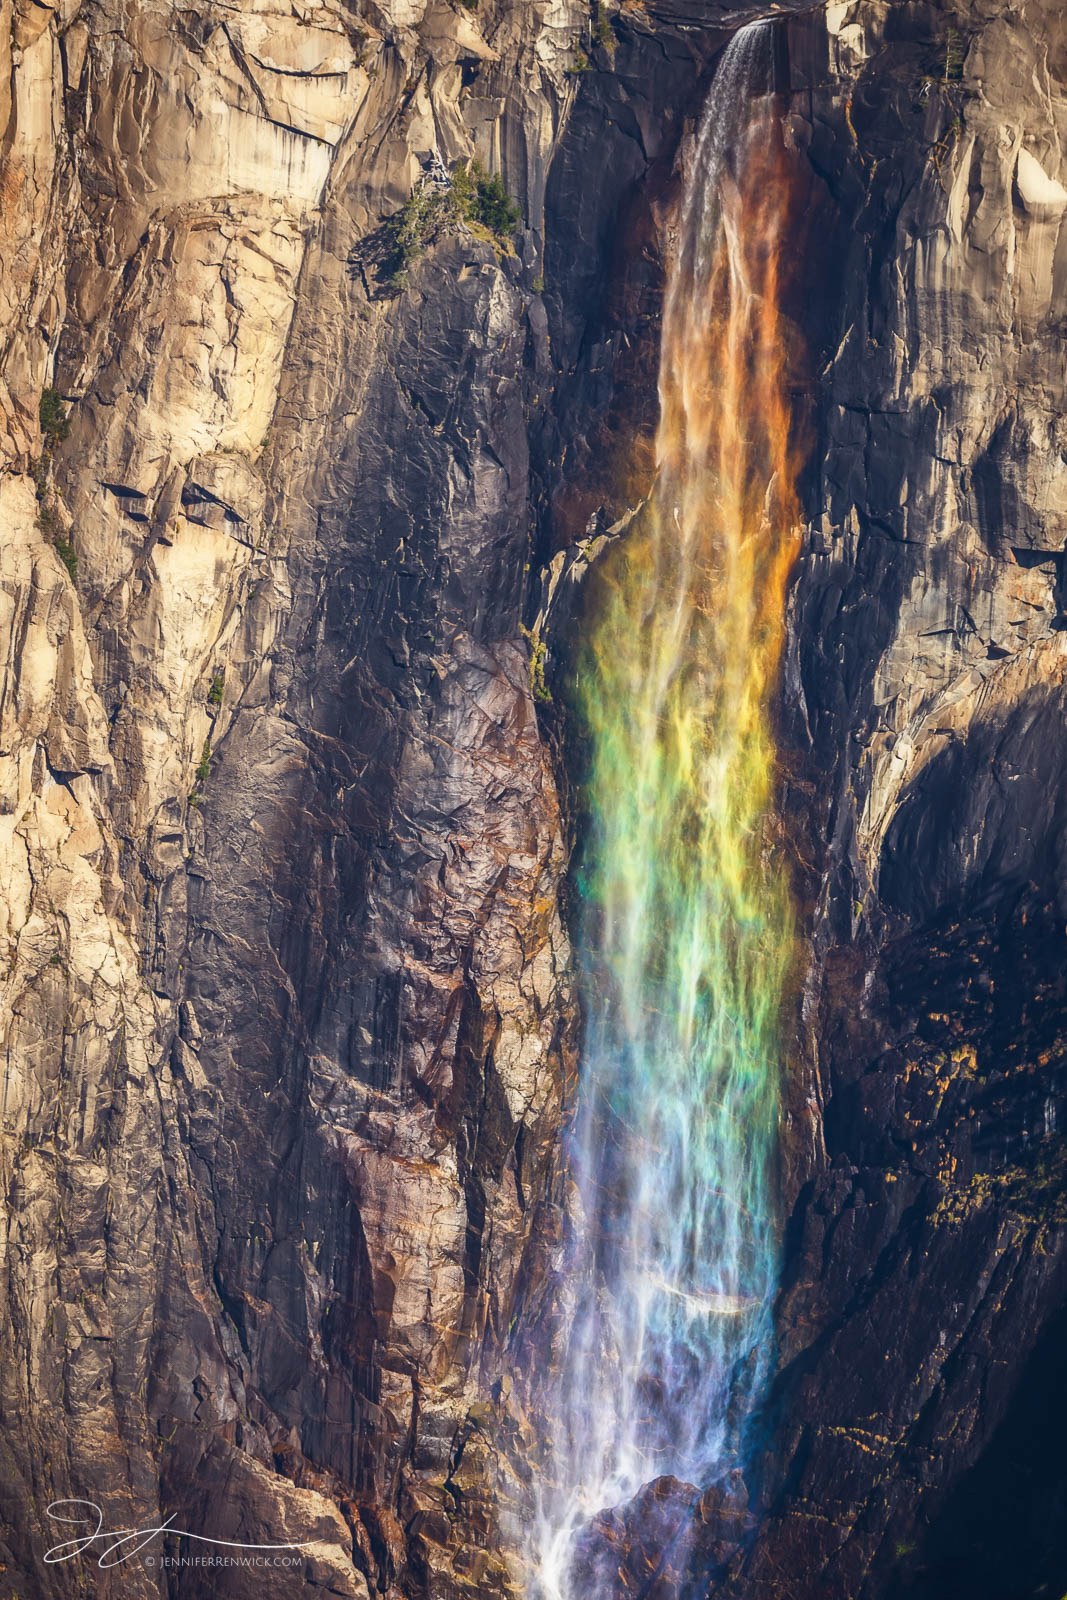 Bridalveil Fall in Yosemite National Park catches the light just right and transforms into a rainbow waterfall.